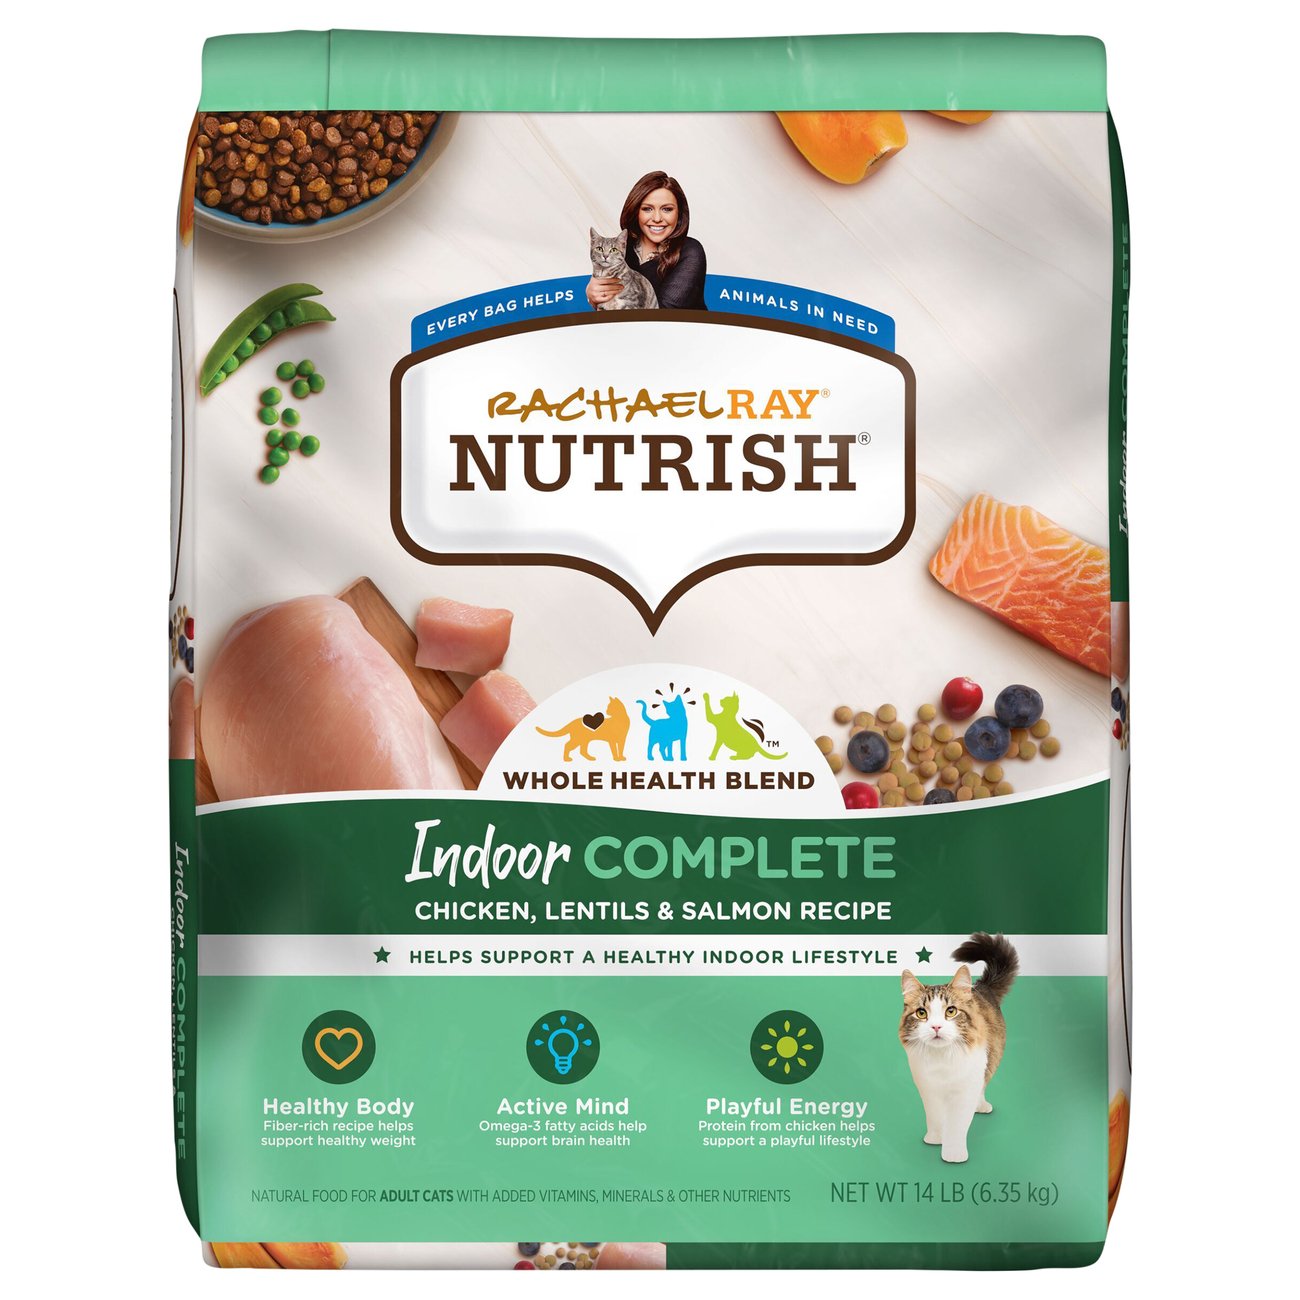 Rachael Ray Nutrish Indoor Complete Dry Cat Food Shop Cats at HEB